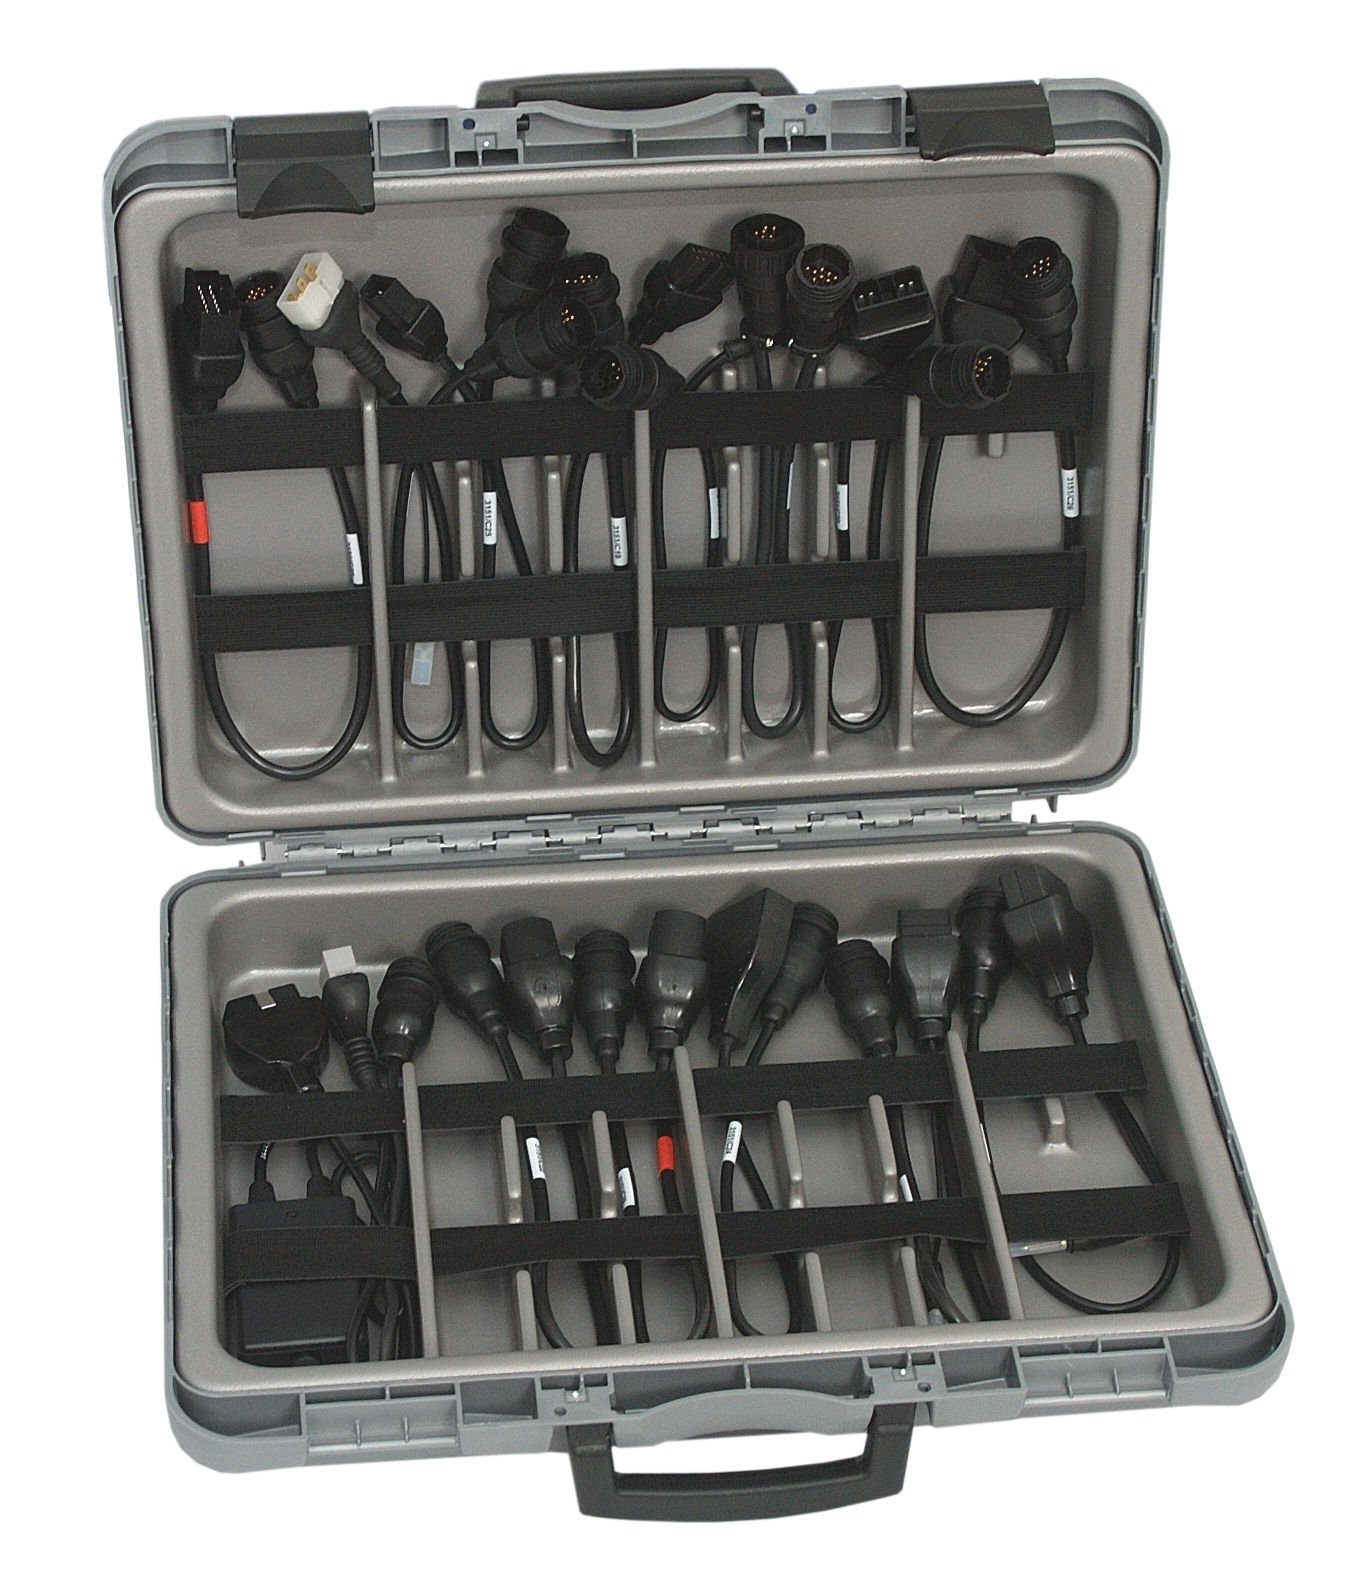 OHW CONSTRUCTION EQUIPMENT CABLE CASE